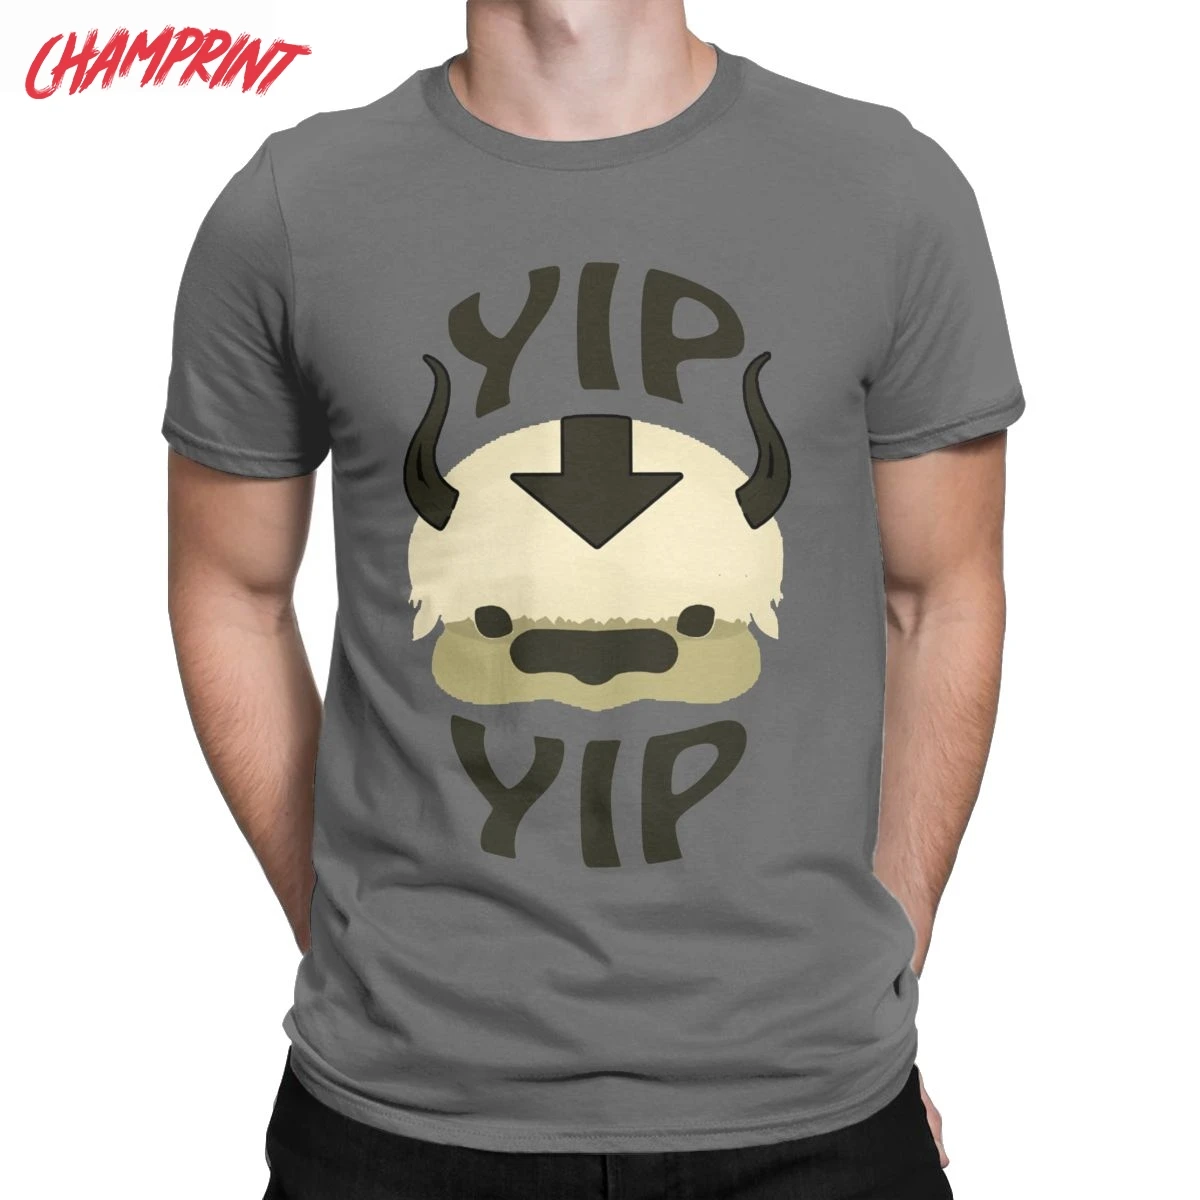 Yip Yip Appa Avatar The Last Airbender T-Shirts for Men Round Collar Pure Cotton T Shirts Short Sleeve Tees New Arrival Clothing